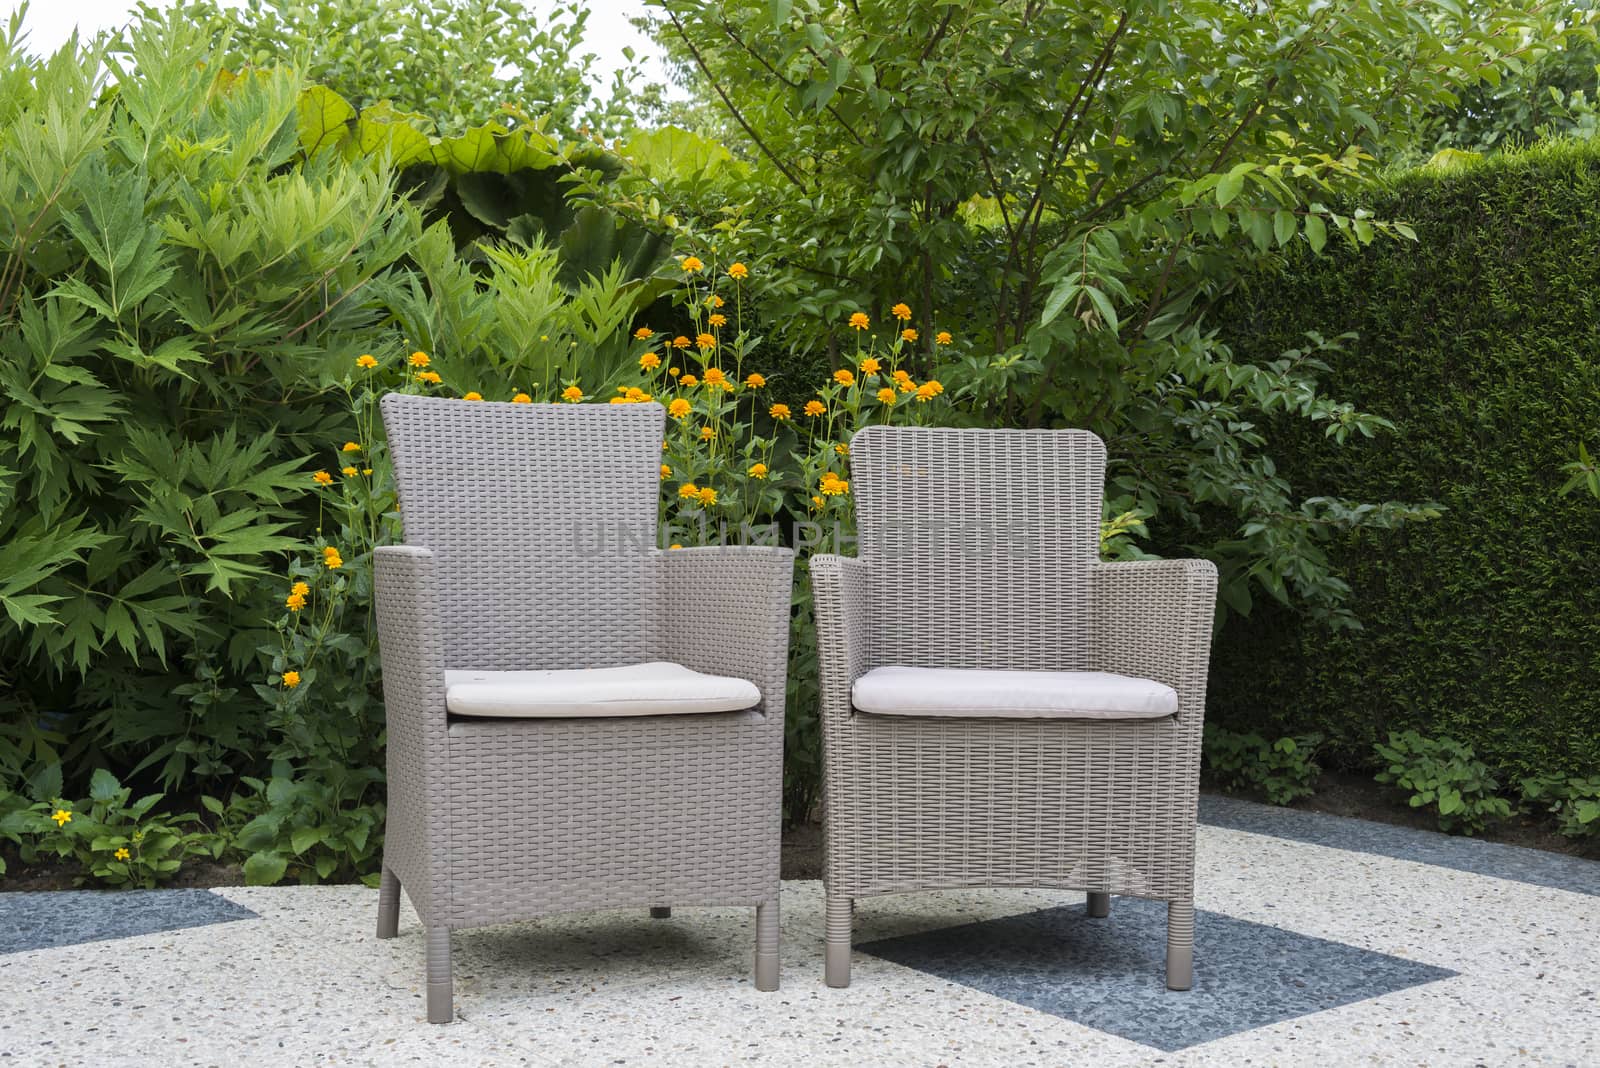 terrace with rattan relax chairs in garden with flowers as background